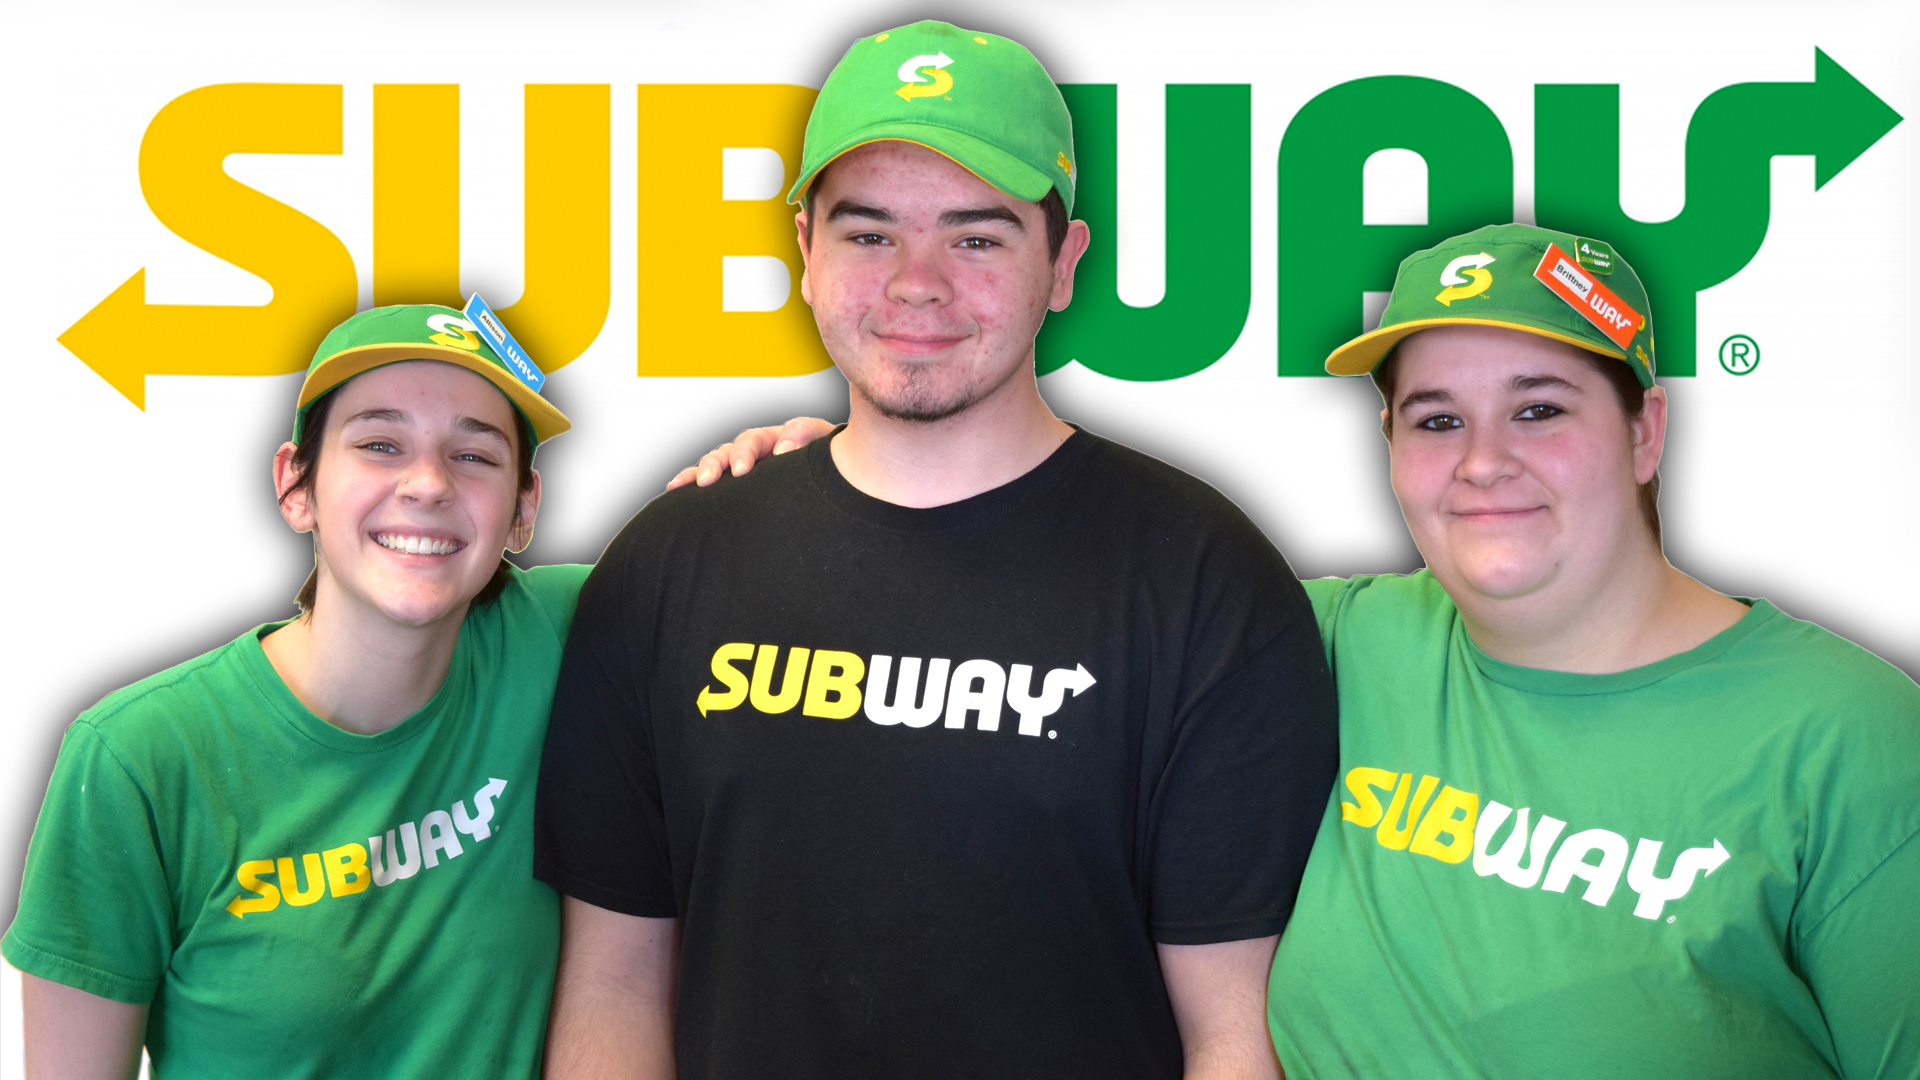 Thursday is Feed-a-Friend day at Subway